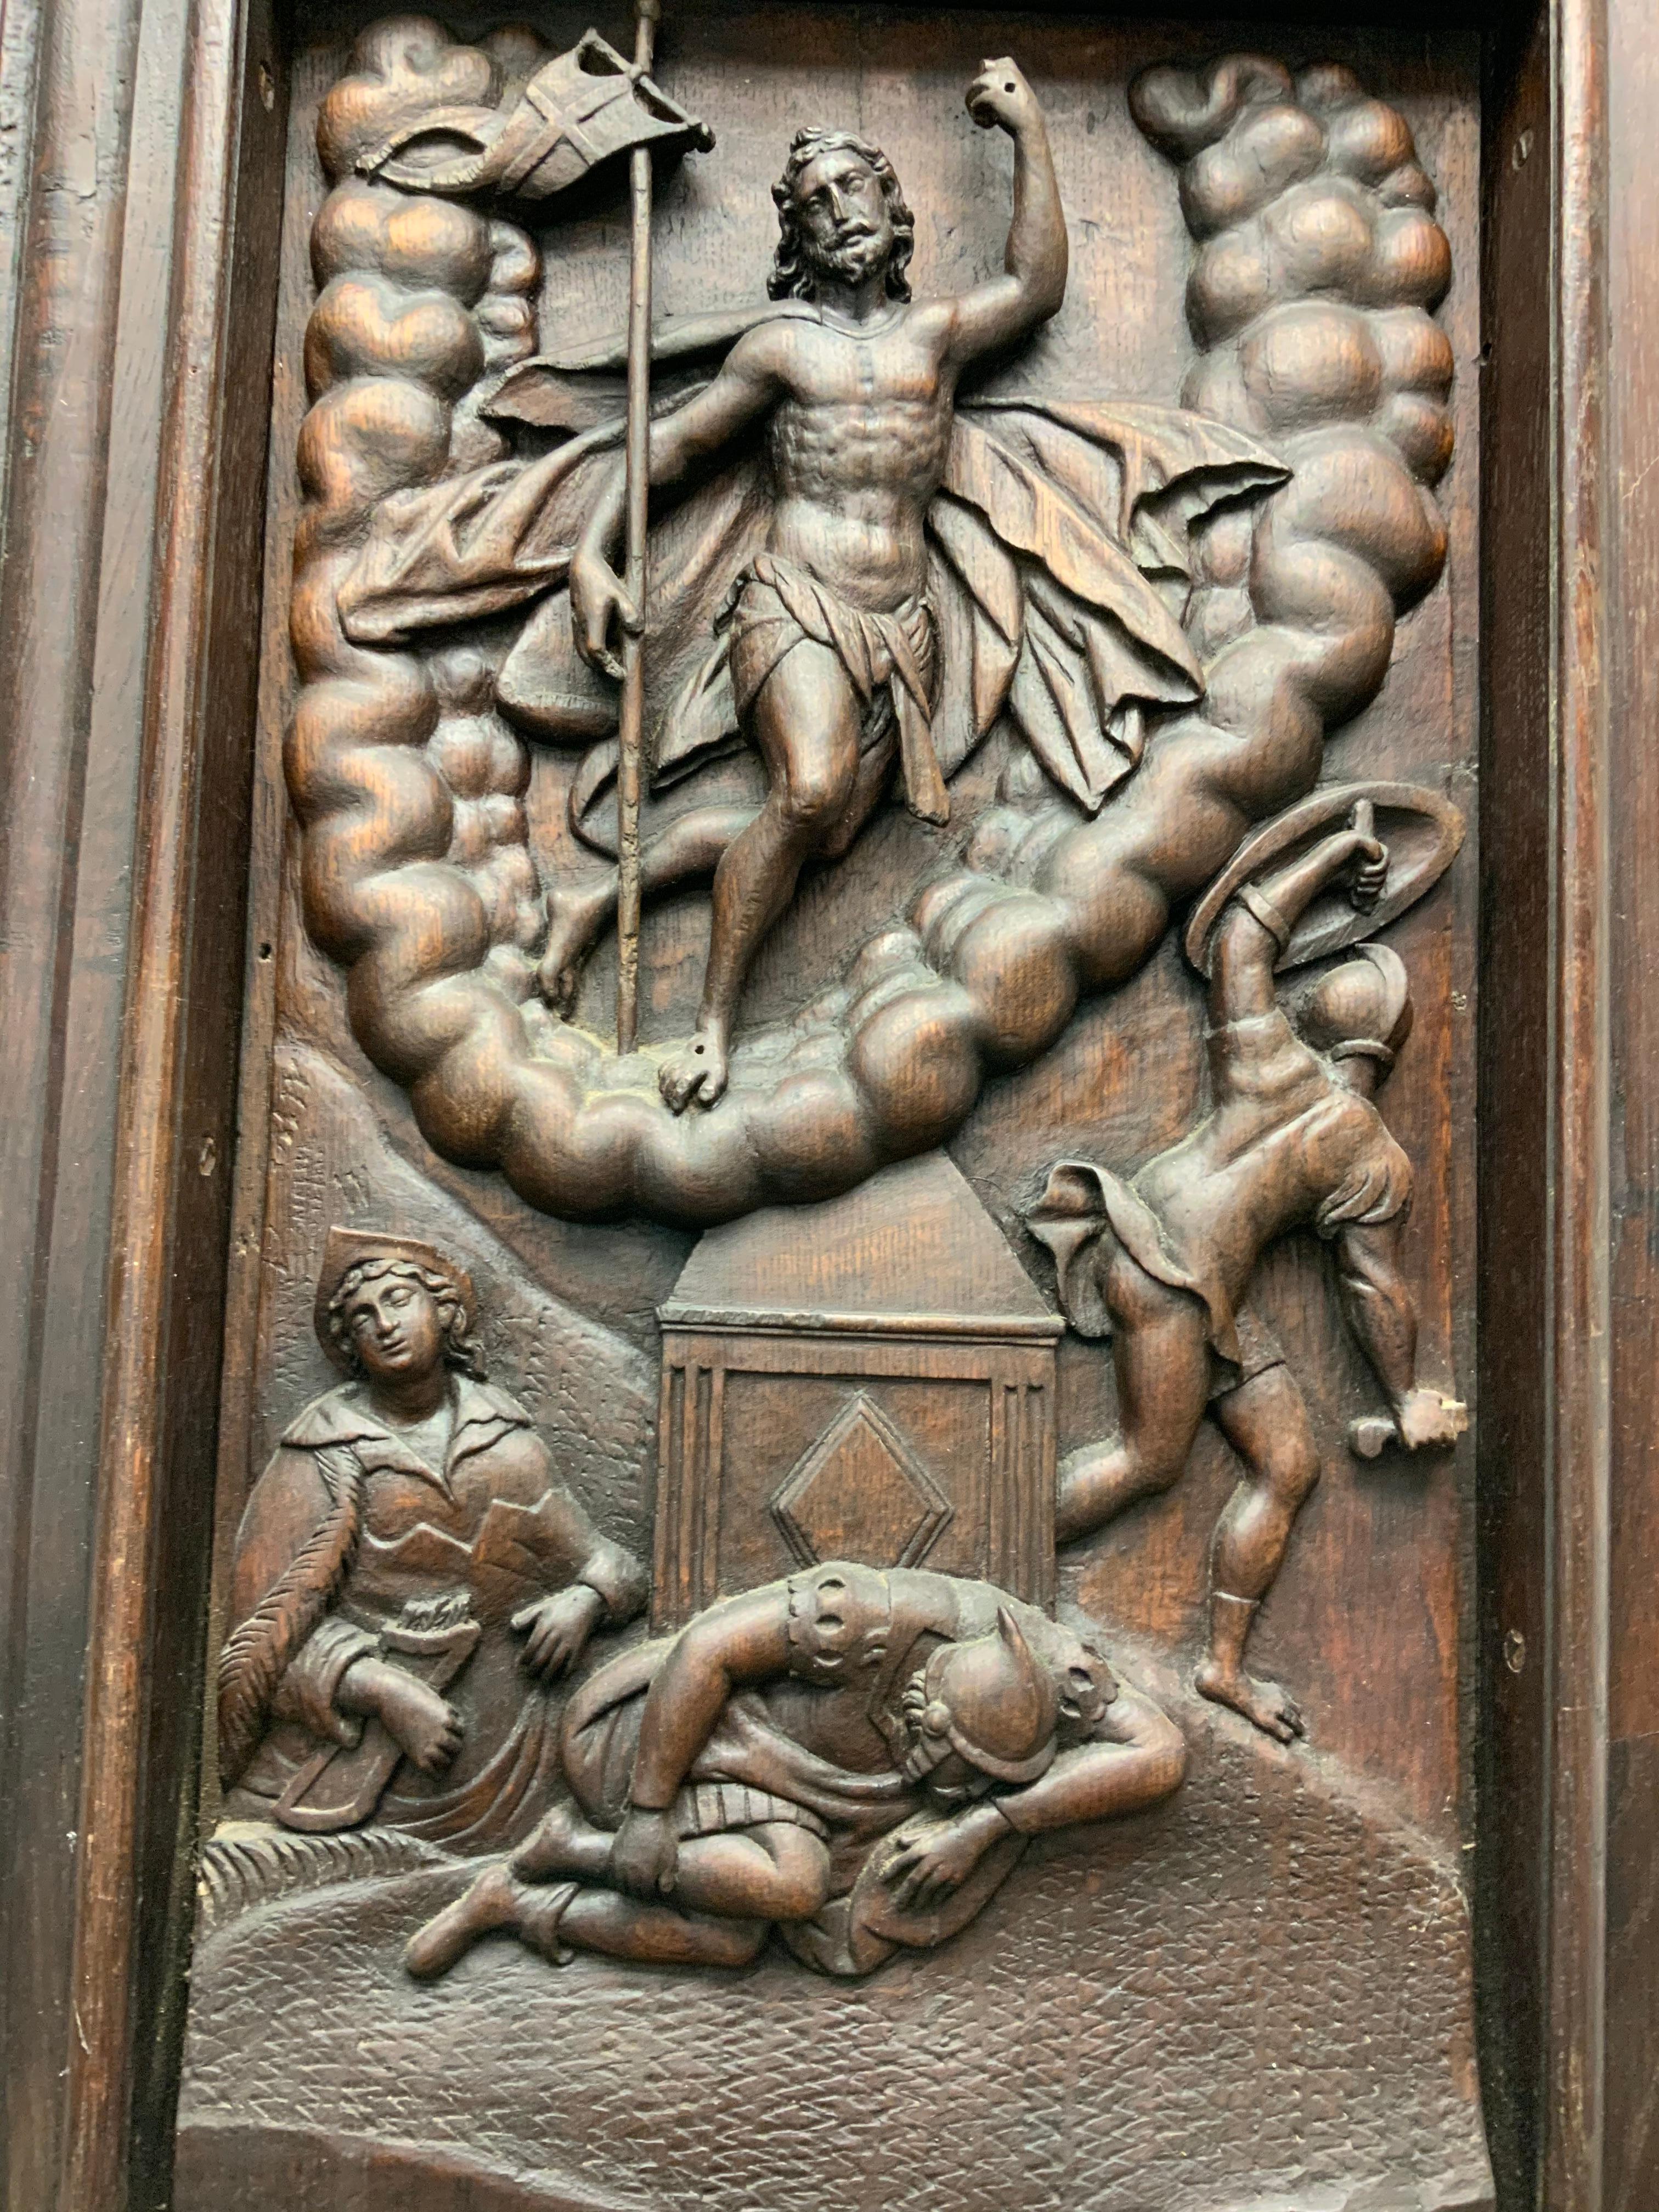 This is a heavy large carved wood plaque depicting an embossed scene of the Resurrection of Jesus Christ. He is standing victorious and elevated over a U shaped cluster of clouds with the banner of Resurrection in his right hand. The left arm is